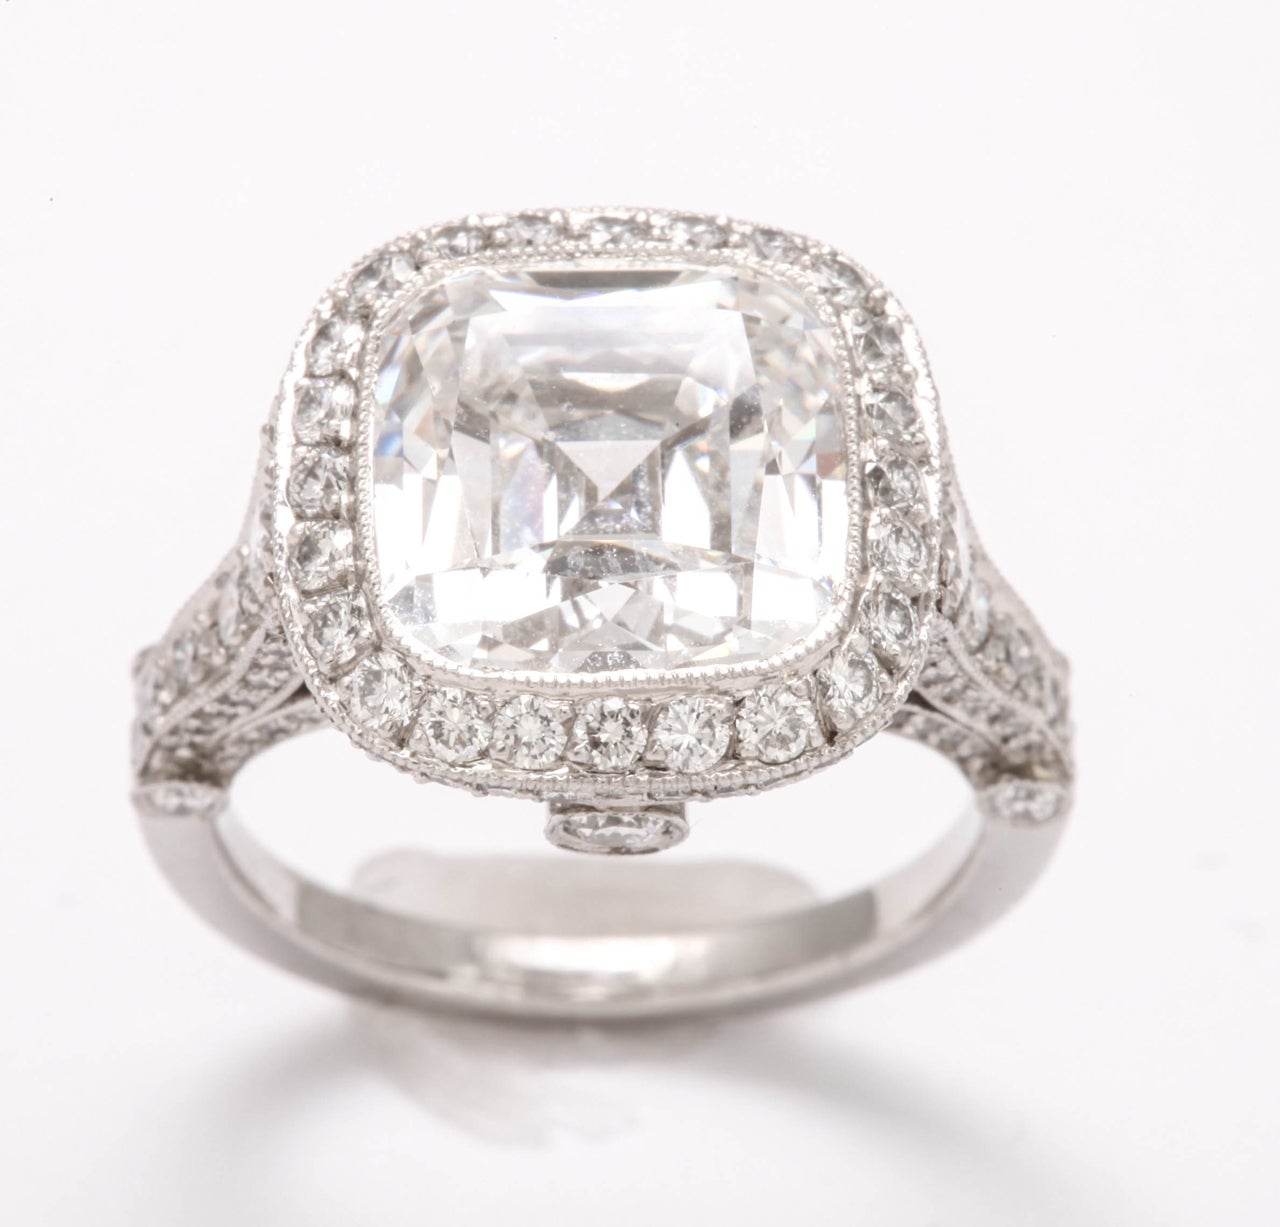 A breathtaking cushion cut ring with center diamond weighing 5.56 carats and surrounding 1.30 carats of round brilliant diamonds.The diamonds are E color and VS2 clarity. This exquisite piece is sign Tiffany & Co., the mounting is called the